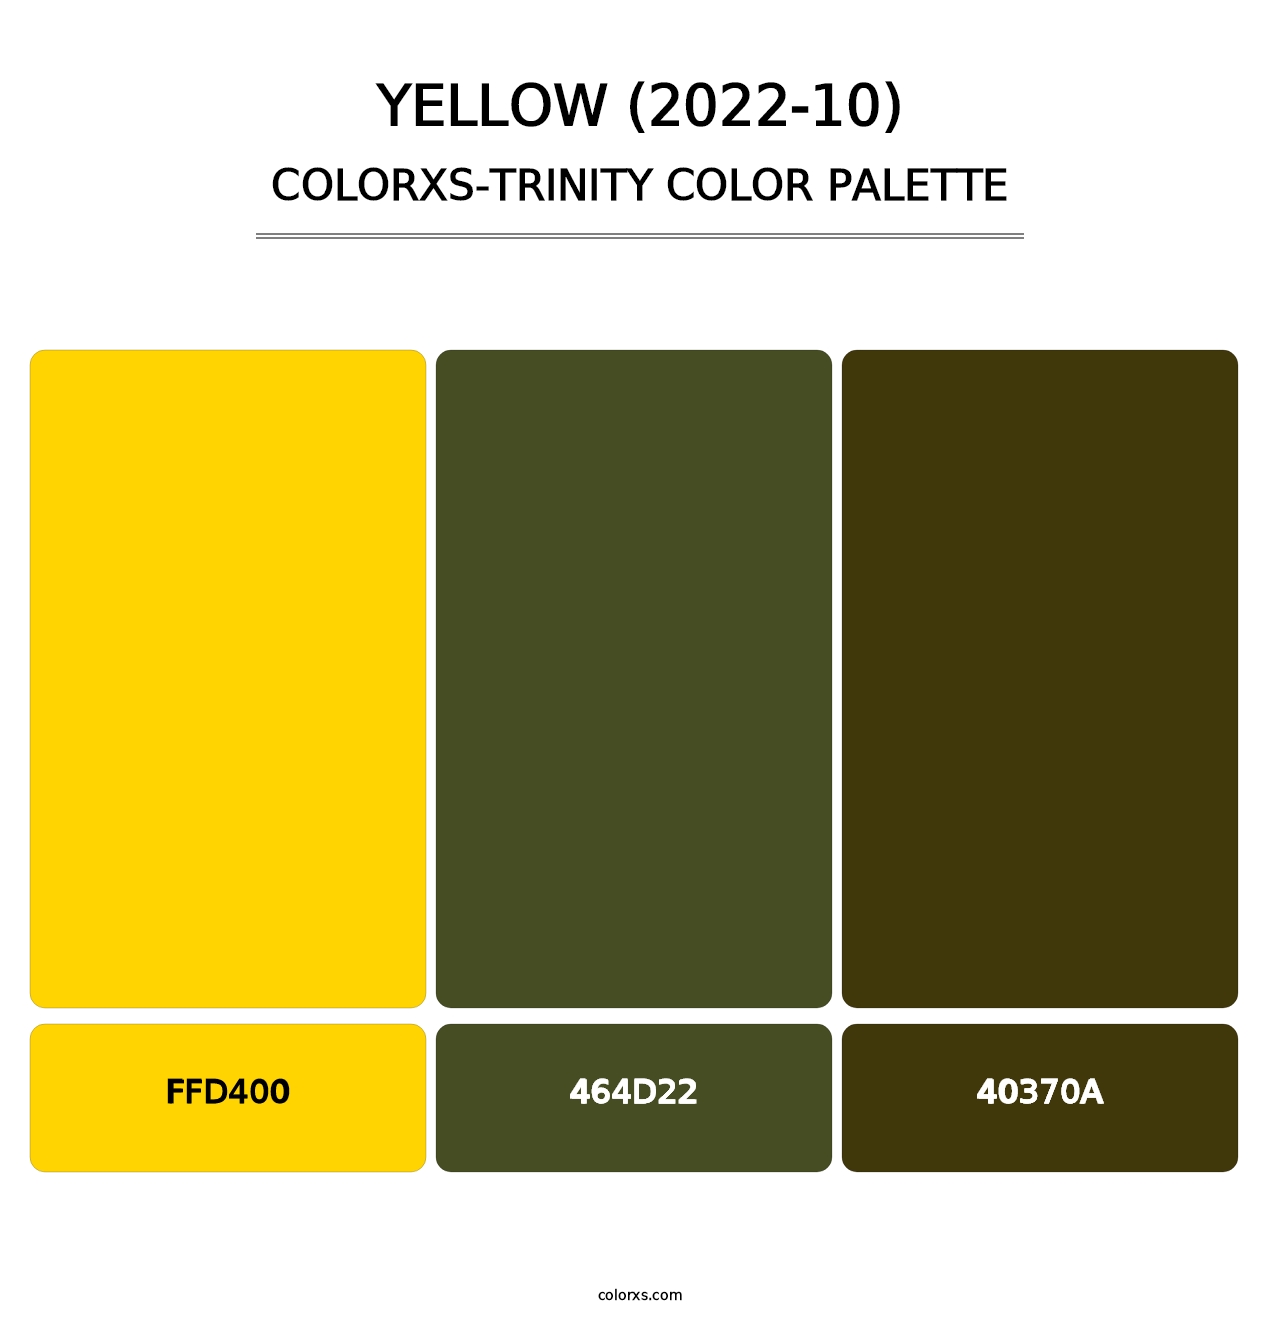 Yellow (2022-10) - Colorxs Trinity Palette